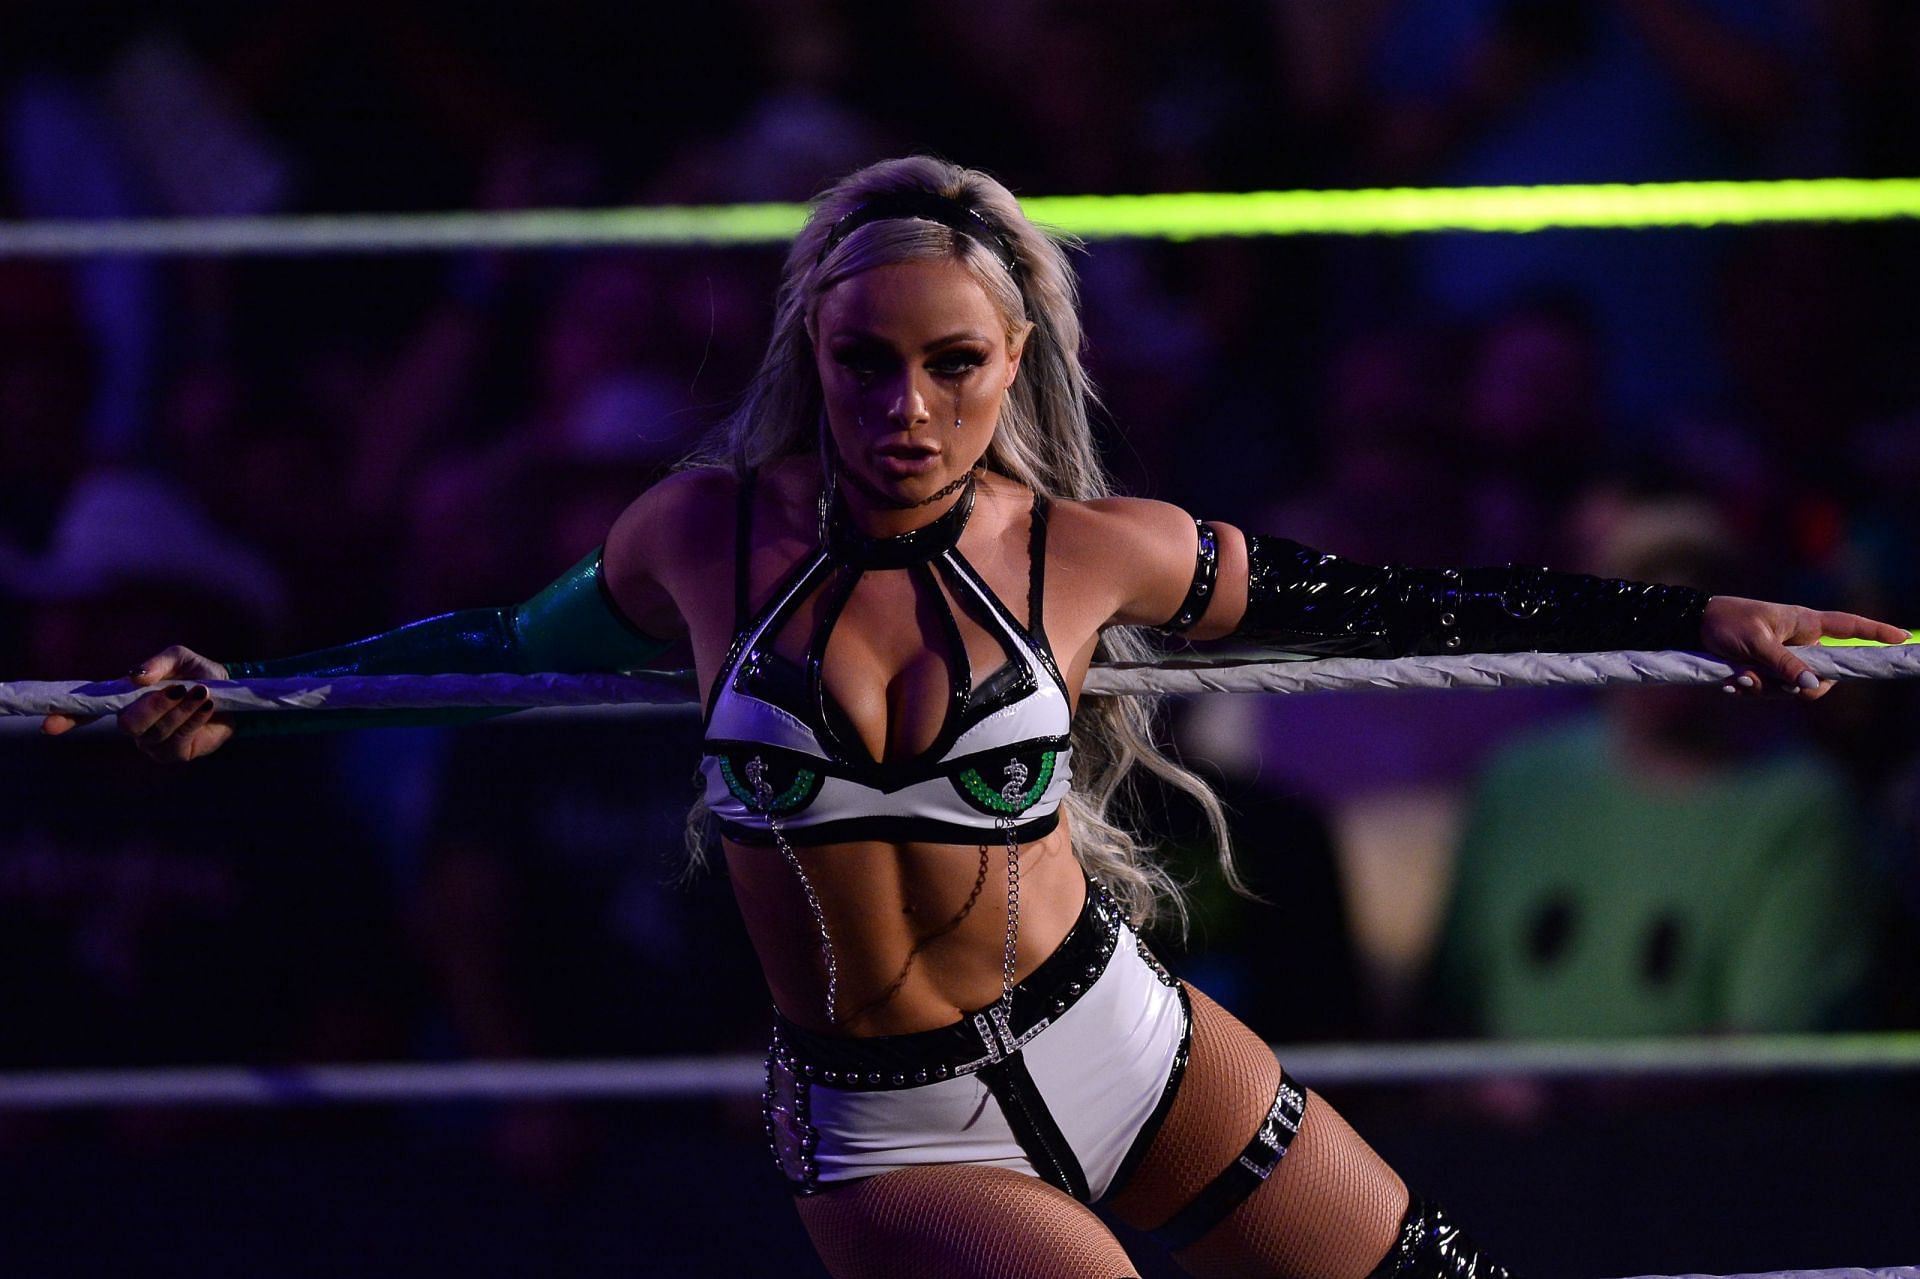 Liv Morgan was assisted by a returning star on SmackDown